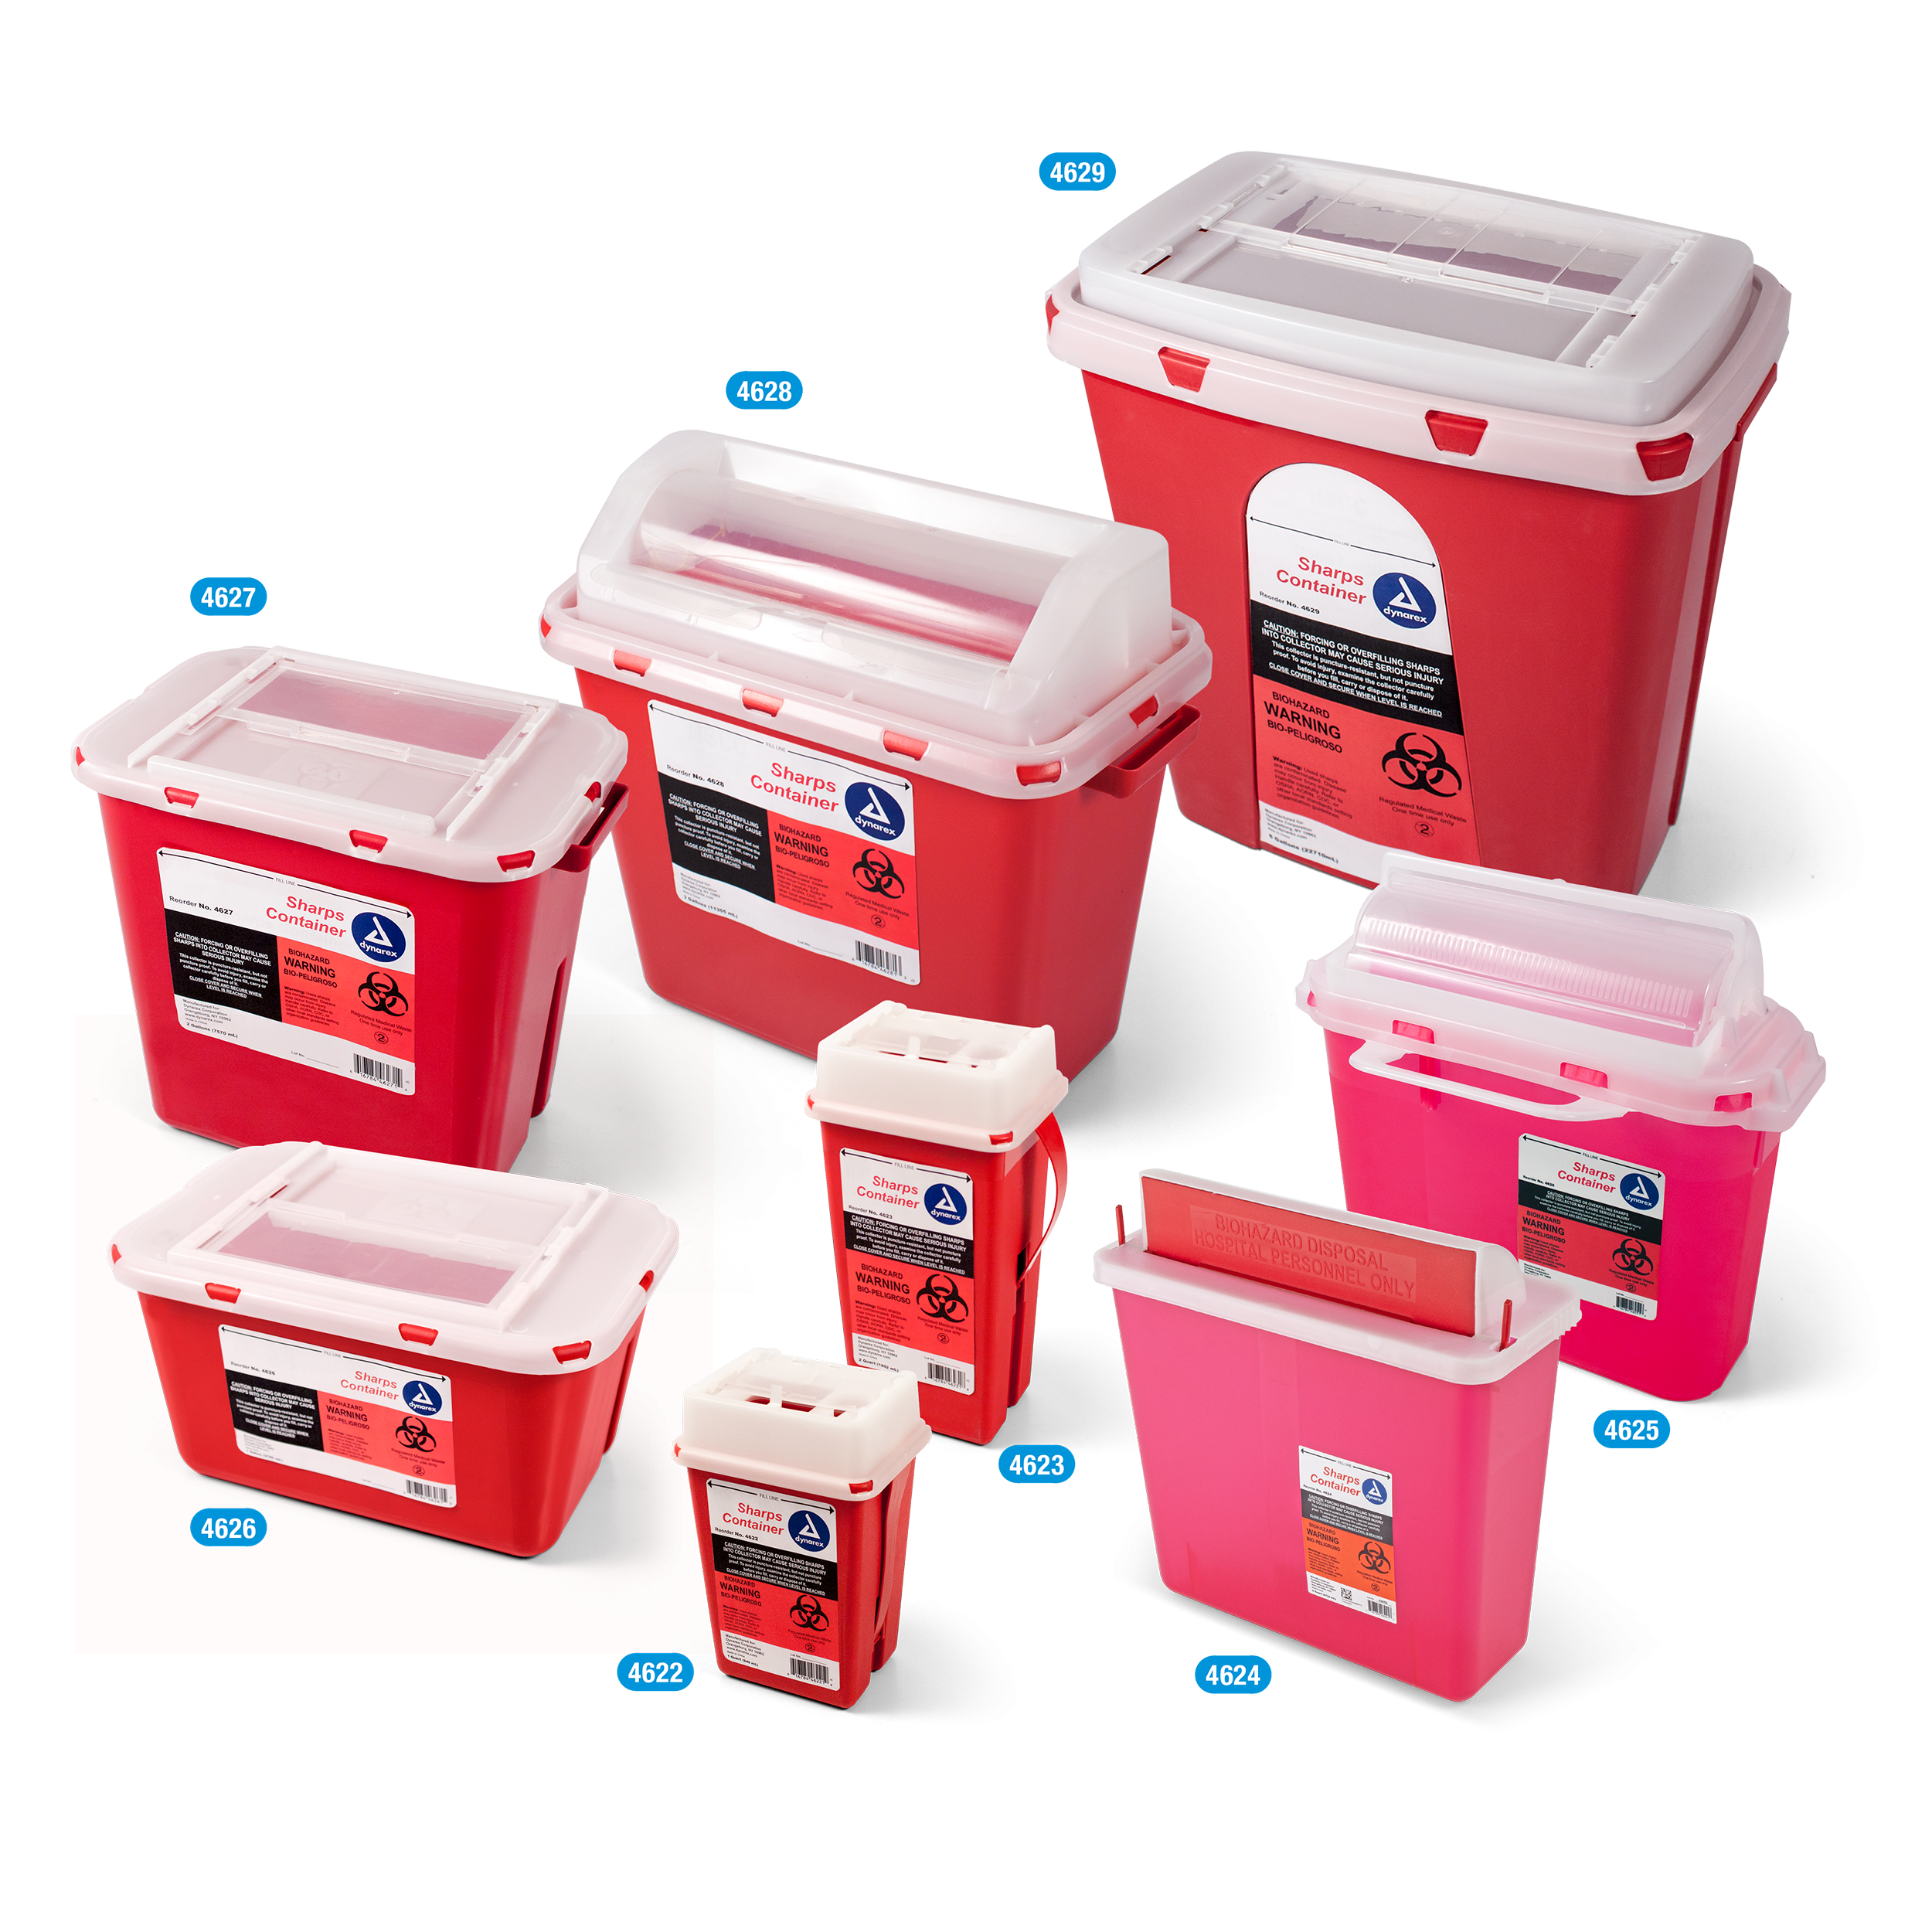 Sharps Containers (4013190840433)